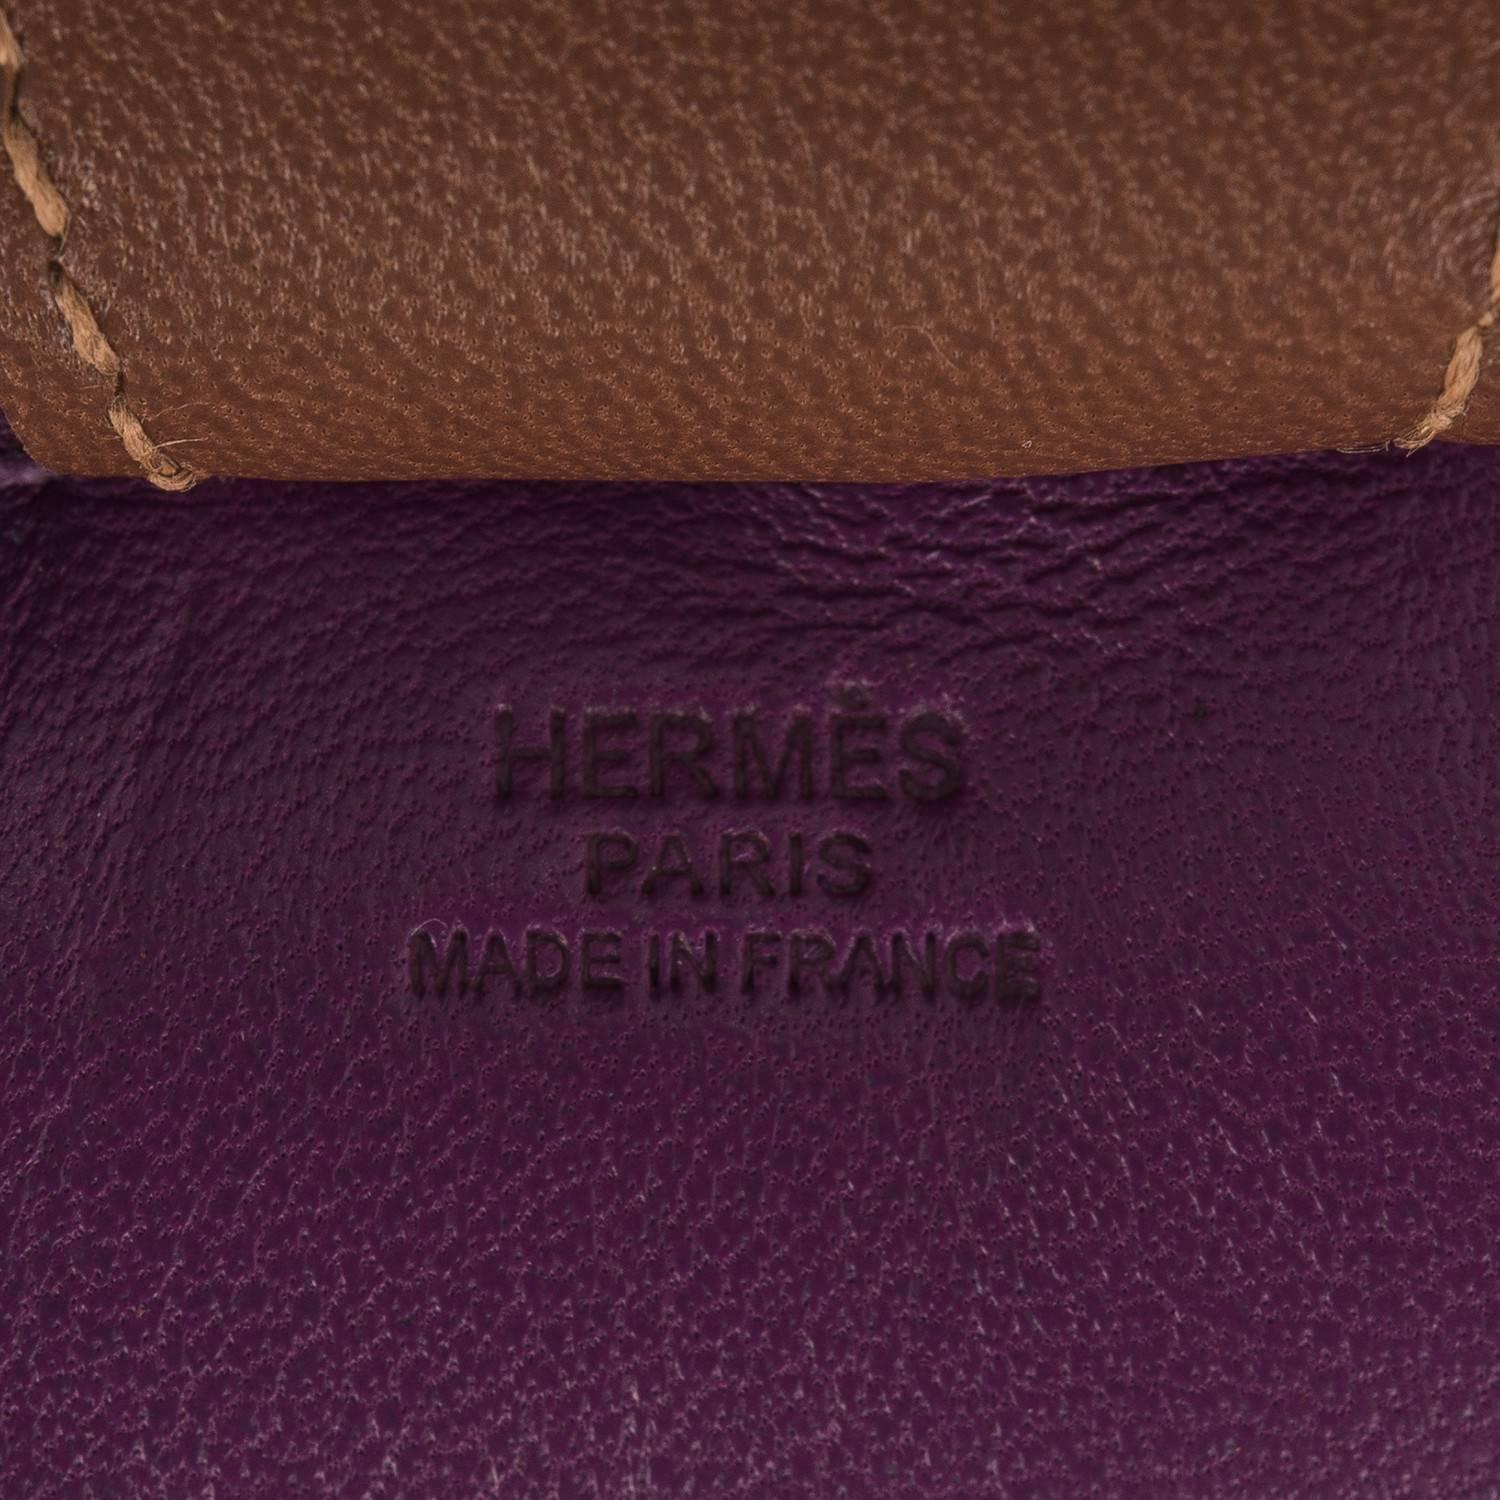 Hermes Grigri Rodeo bag charm in size MM.
 
This charm is made of Anemone Milo lambskin leather and accented with a Blue Izmir mane and tail and a Gold saddle and holder.

Origin: France

Condition: Never carried 

Accompanied by: Hermes box,